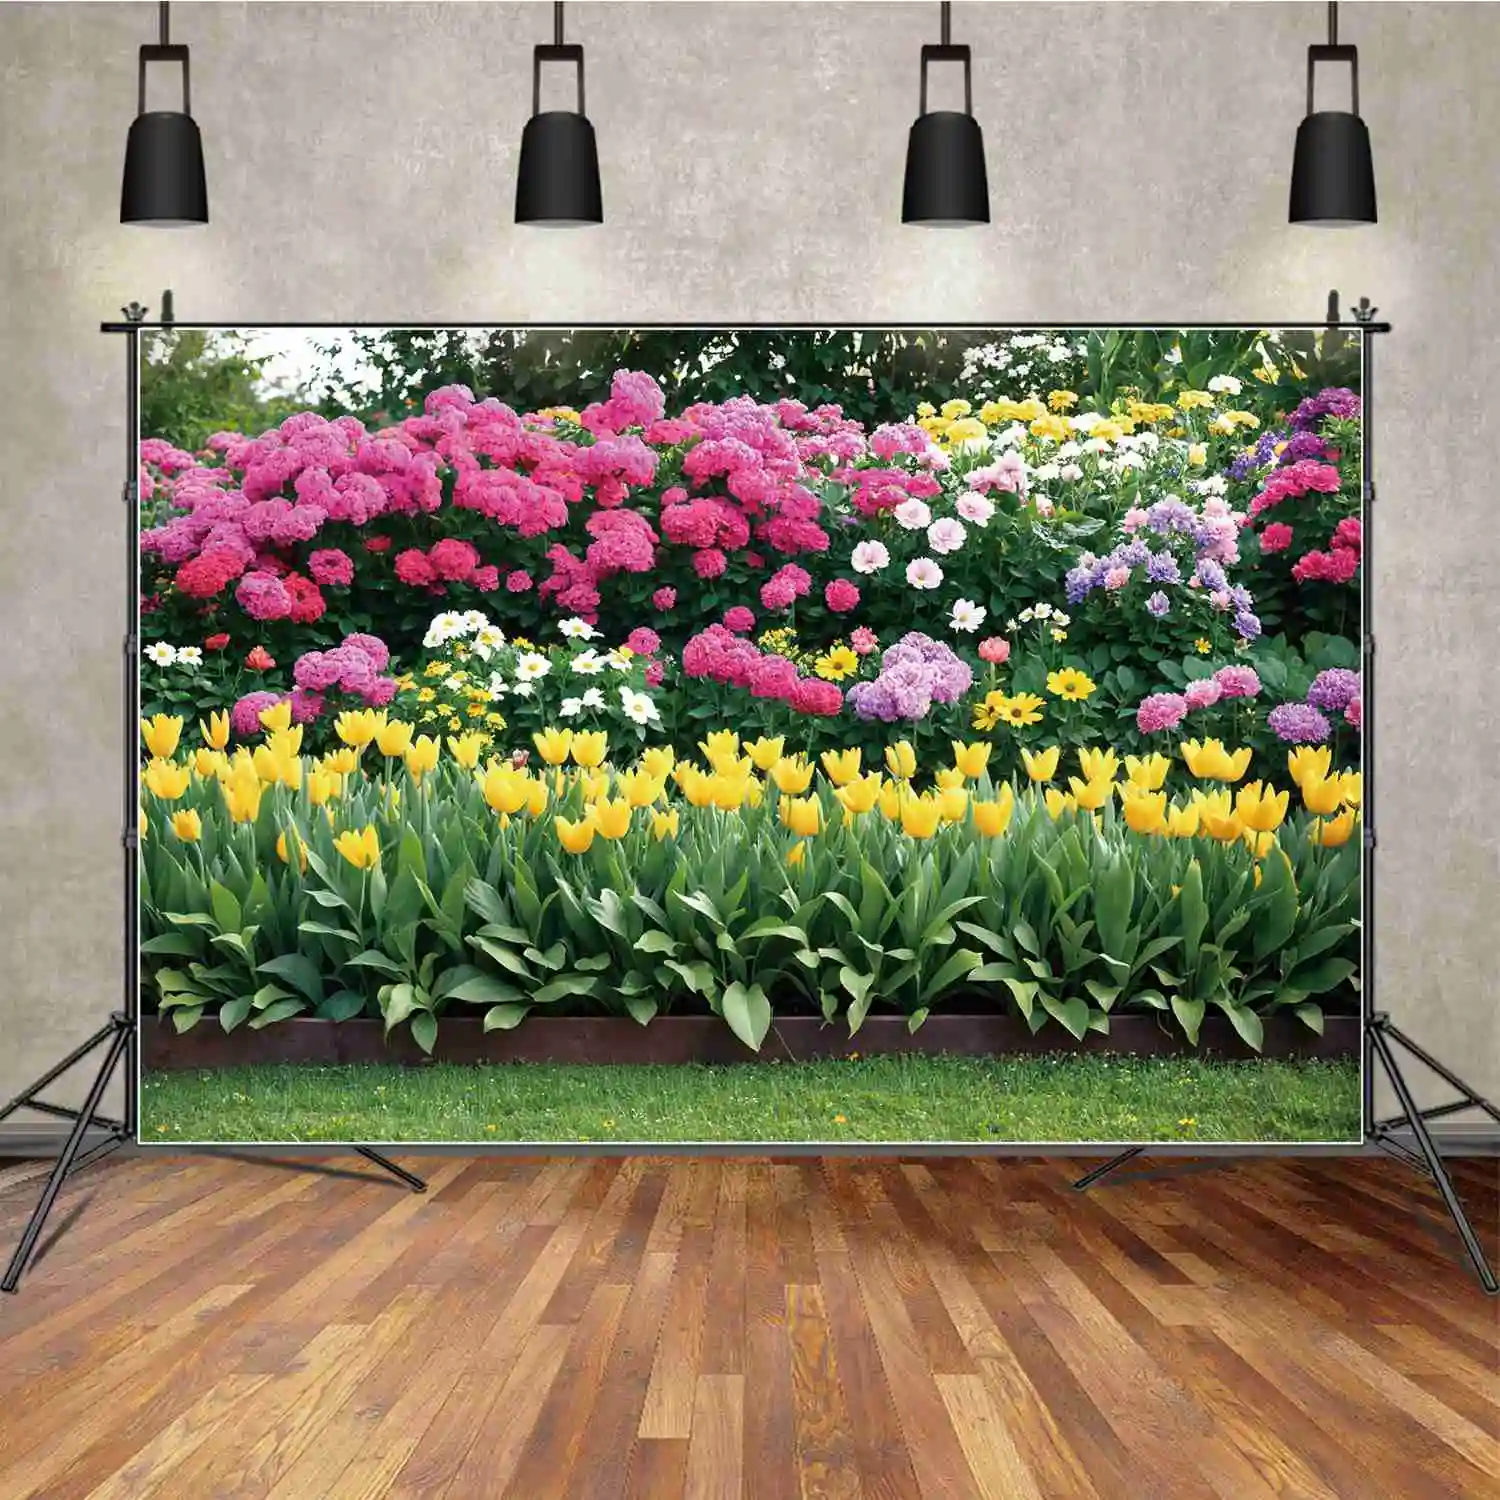 

Spring Flowers Party Photography Backdrops Garden Blossom Wall Grassland Personalized Children Photo Background Photoshoot Props